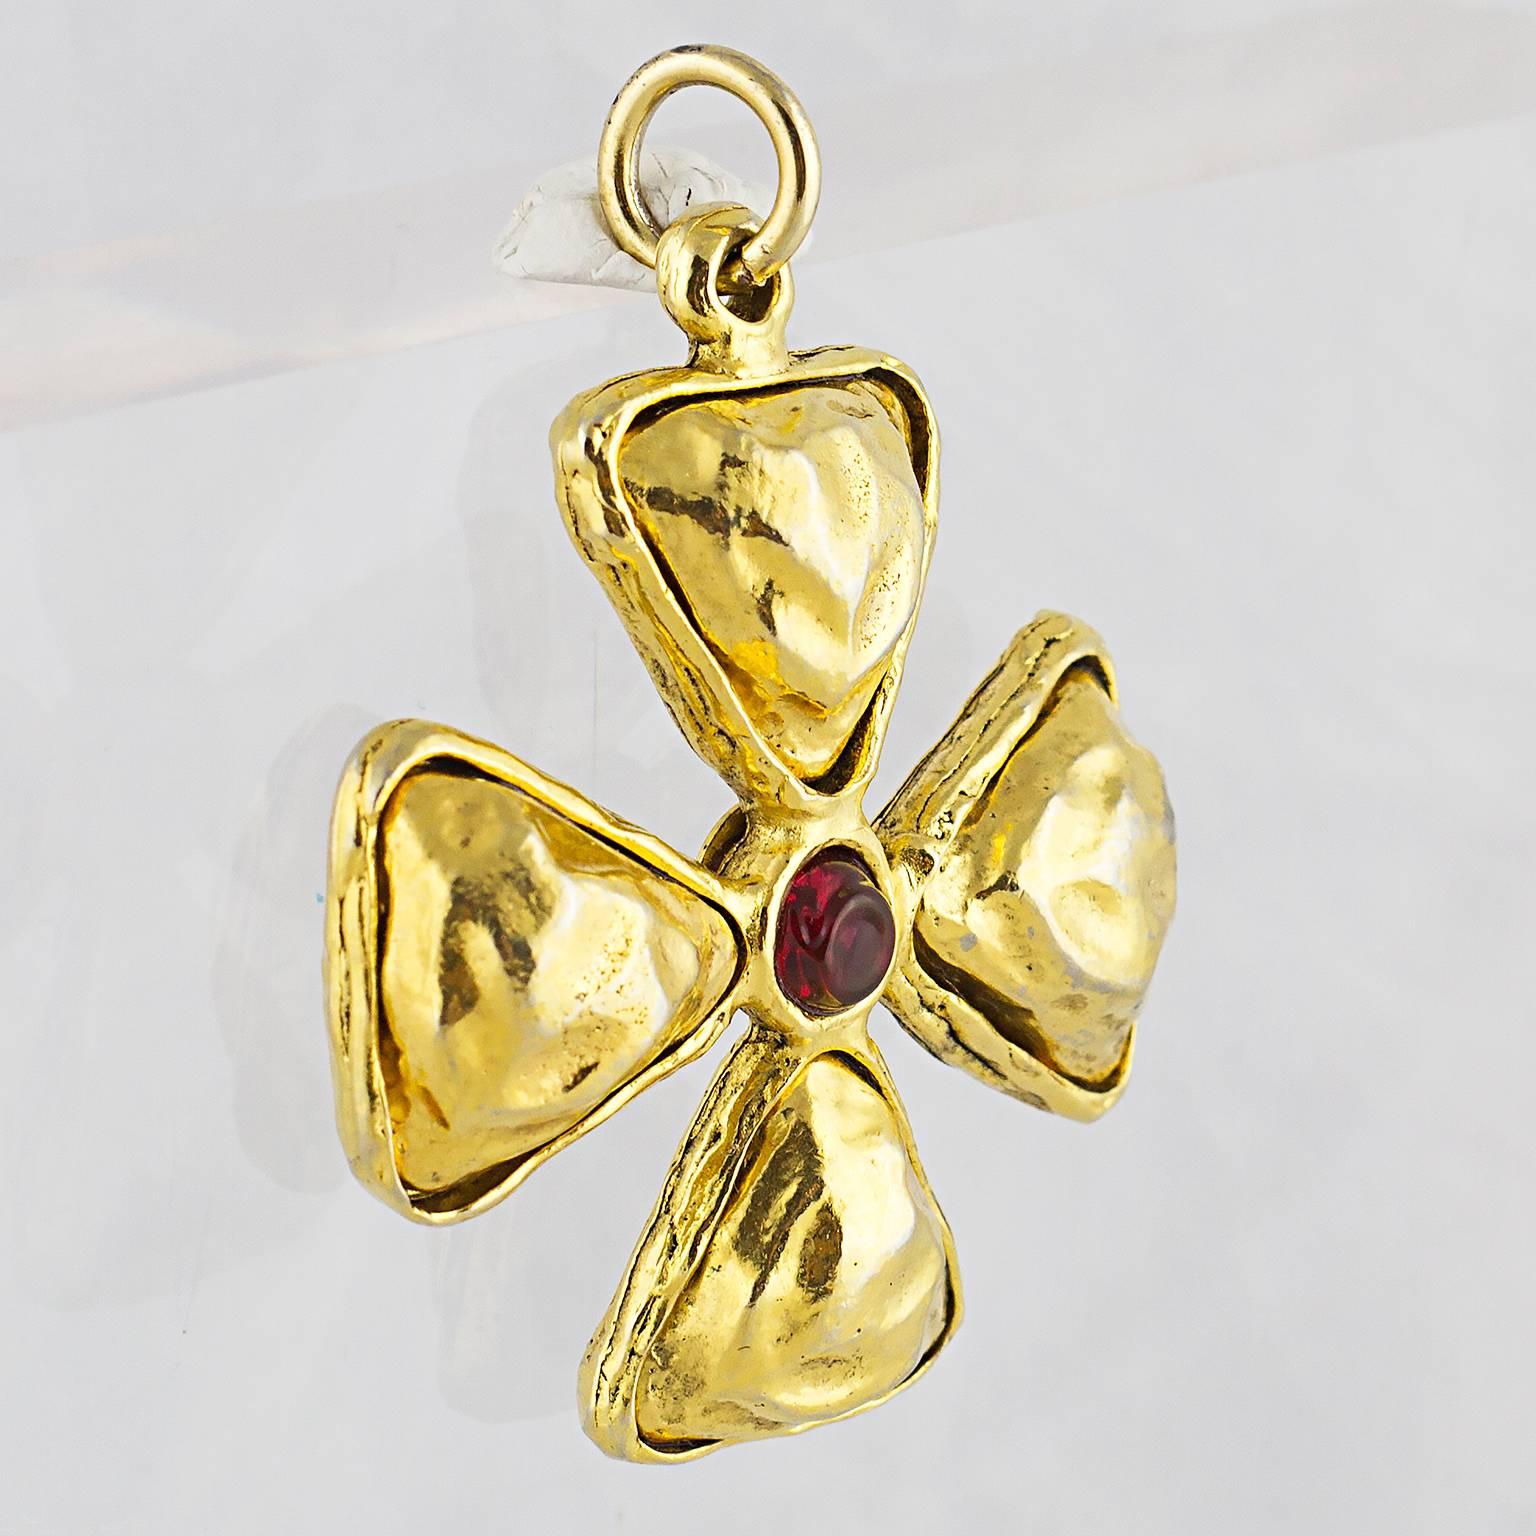 Chanel 1980's Pendant in the form of a Maltese Cross.
In high carat gold plated metal with glass Gripoix Detail.
Made in France in the 1980's.
Perfect worn on a chain or velvet chocker!